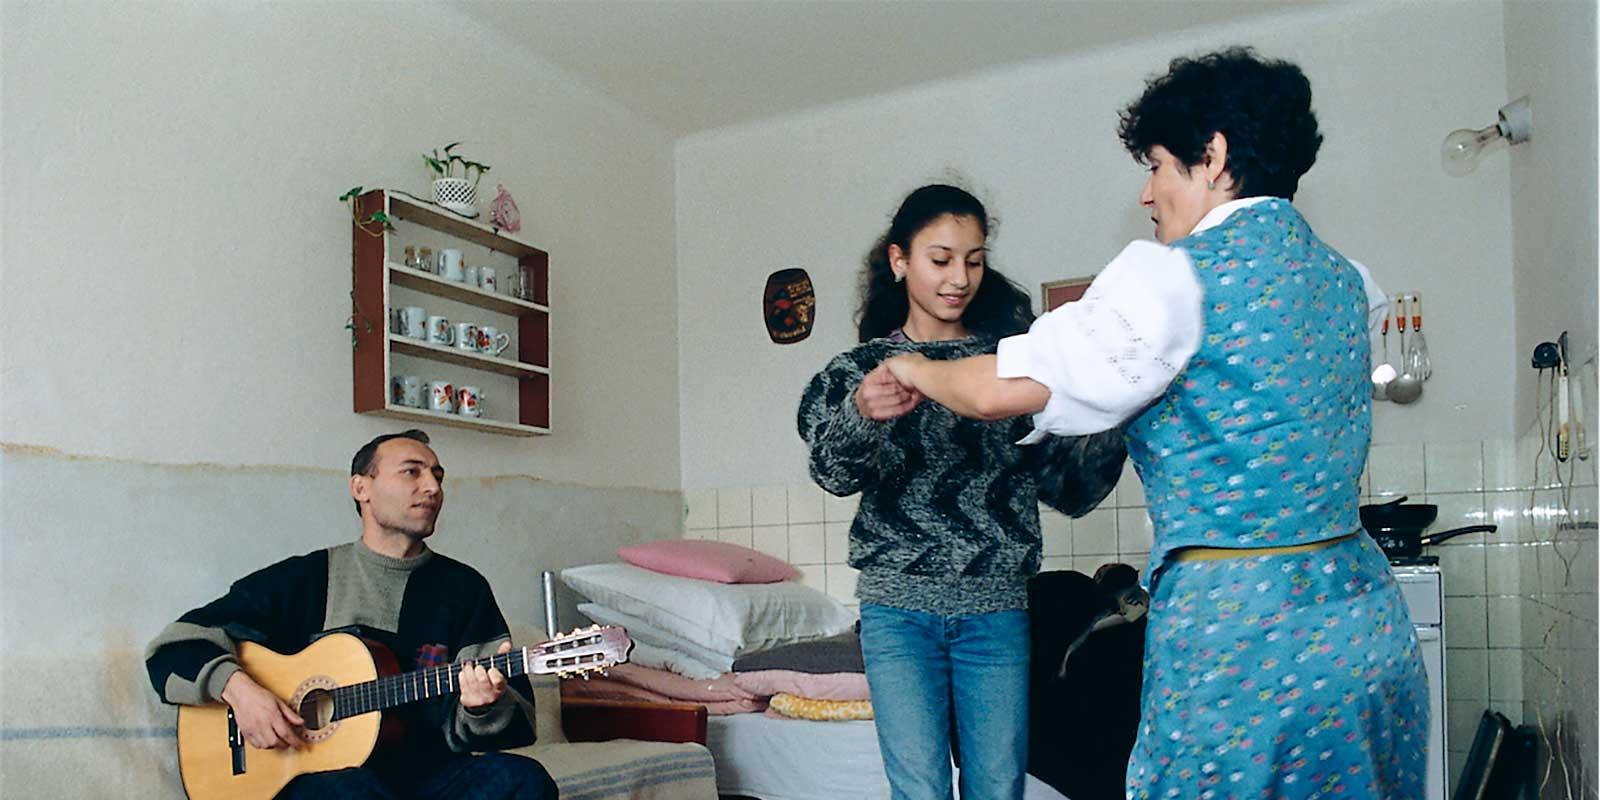 Svetlana dancing with her mother while her father playing guitar